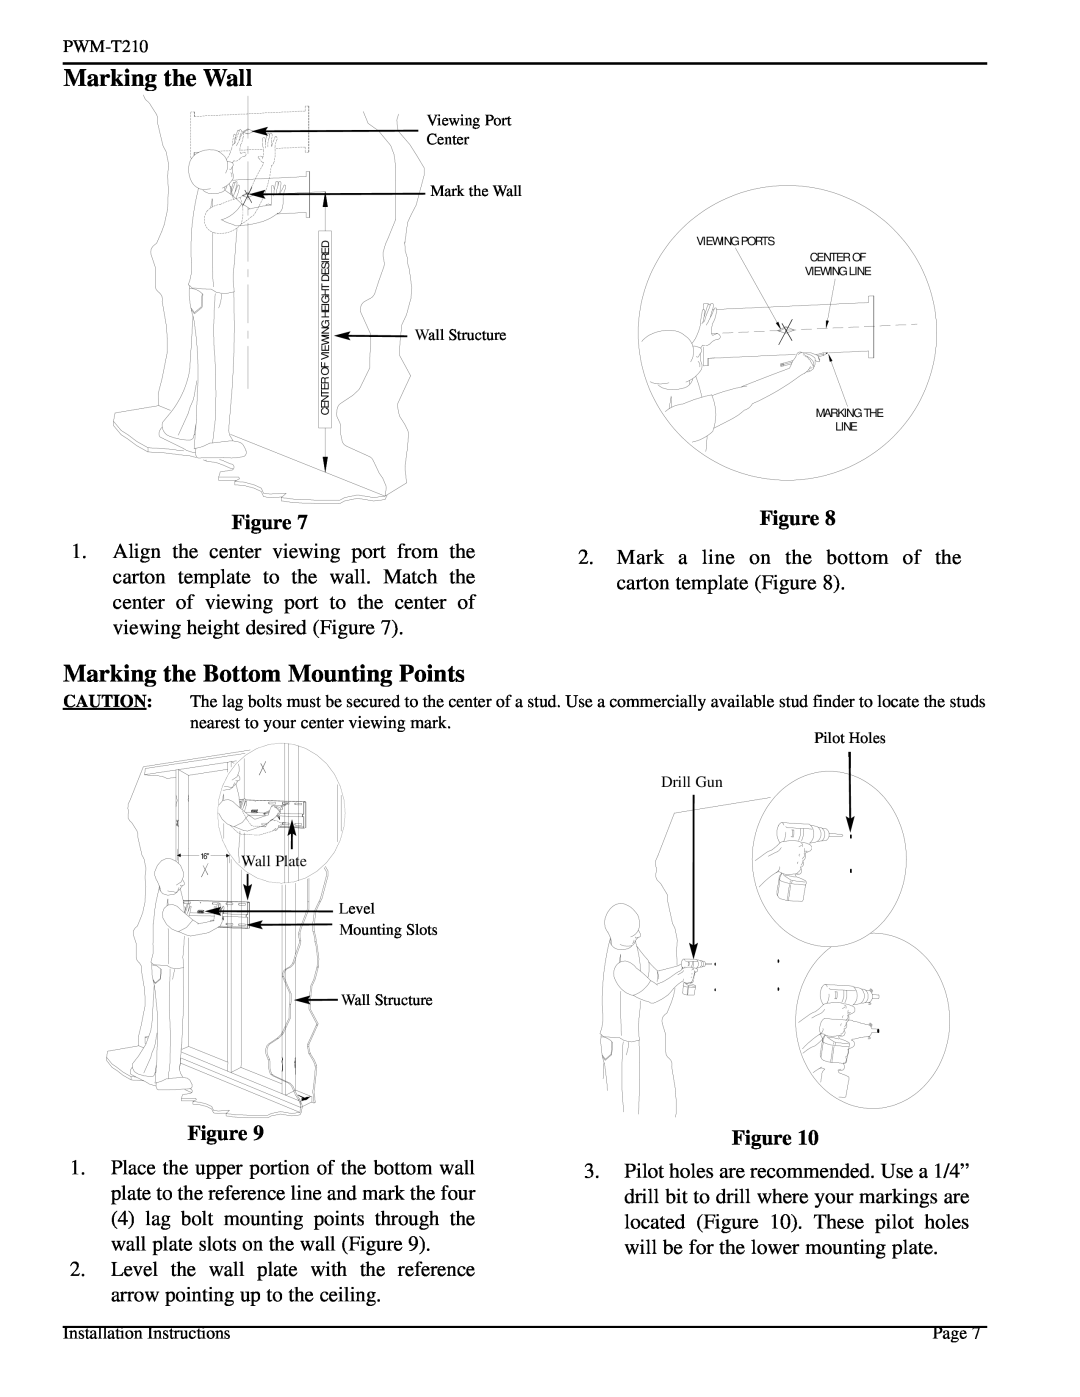 Pioneer PWM-T210 installation instructions Marking the Wall, Marking the Bottom Mounting Points 